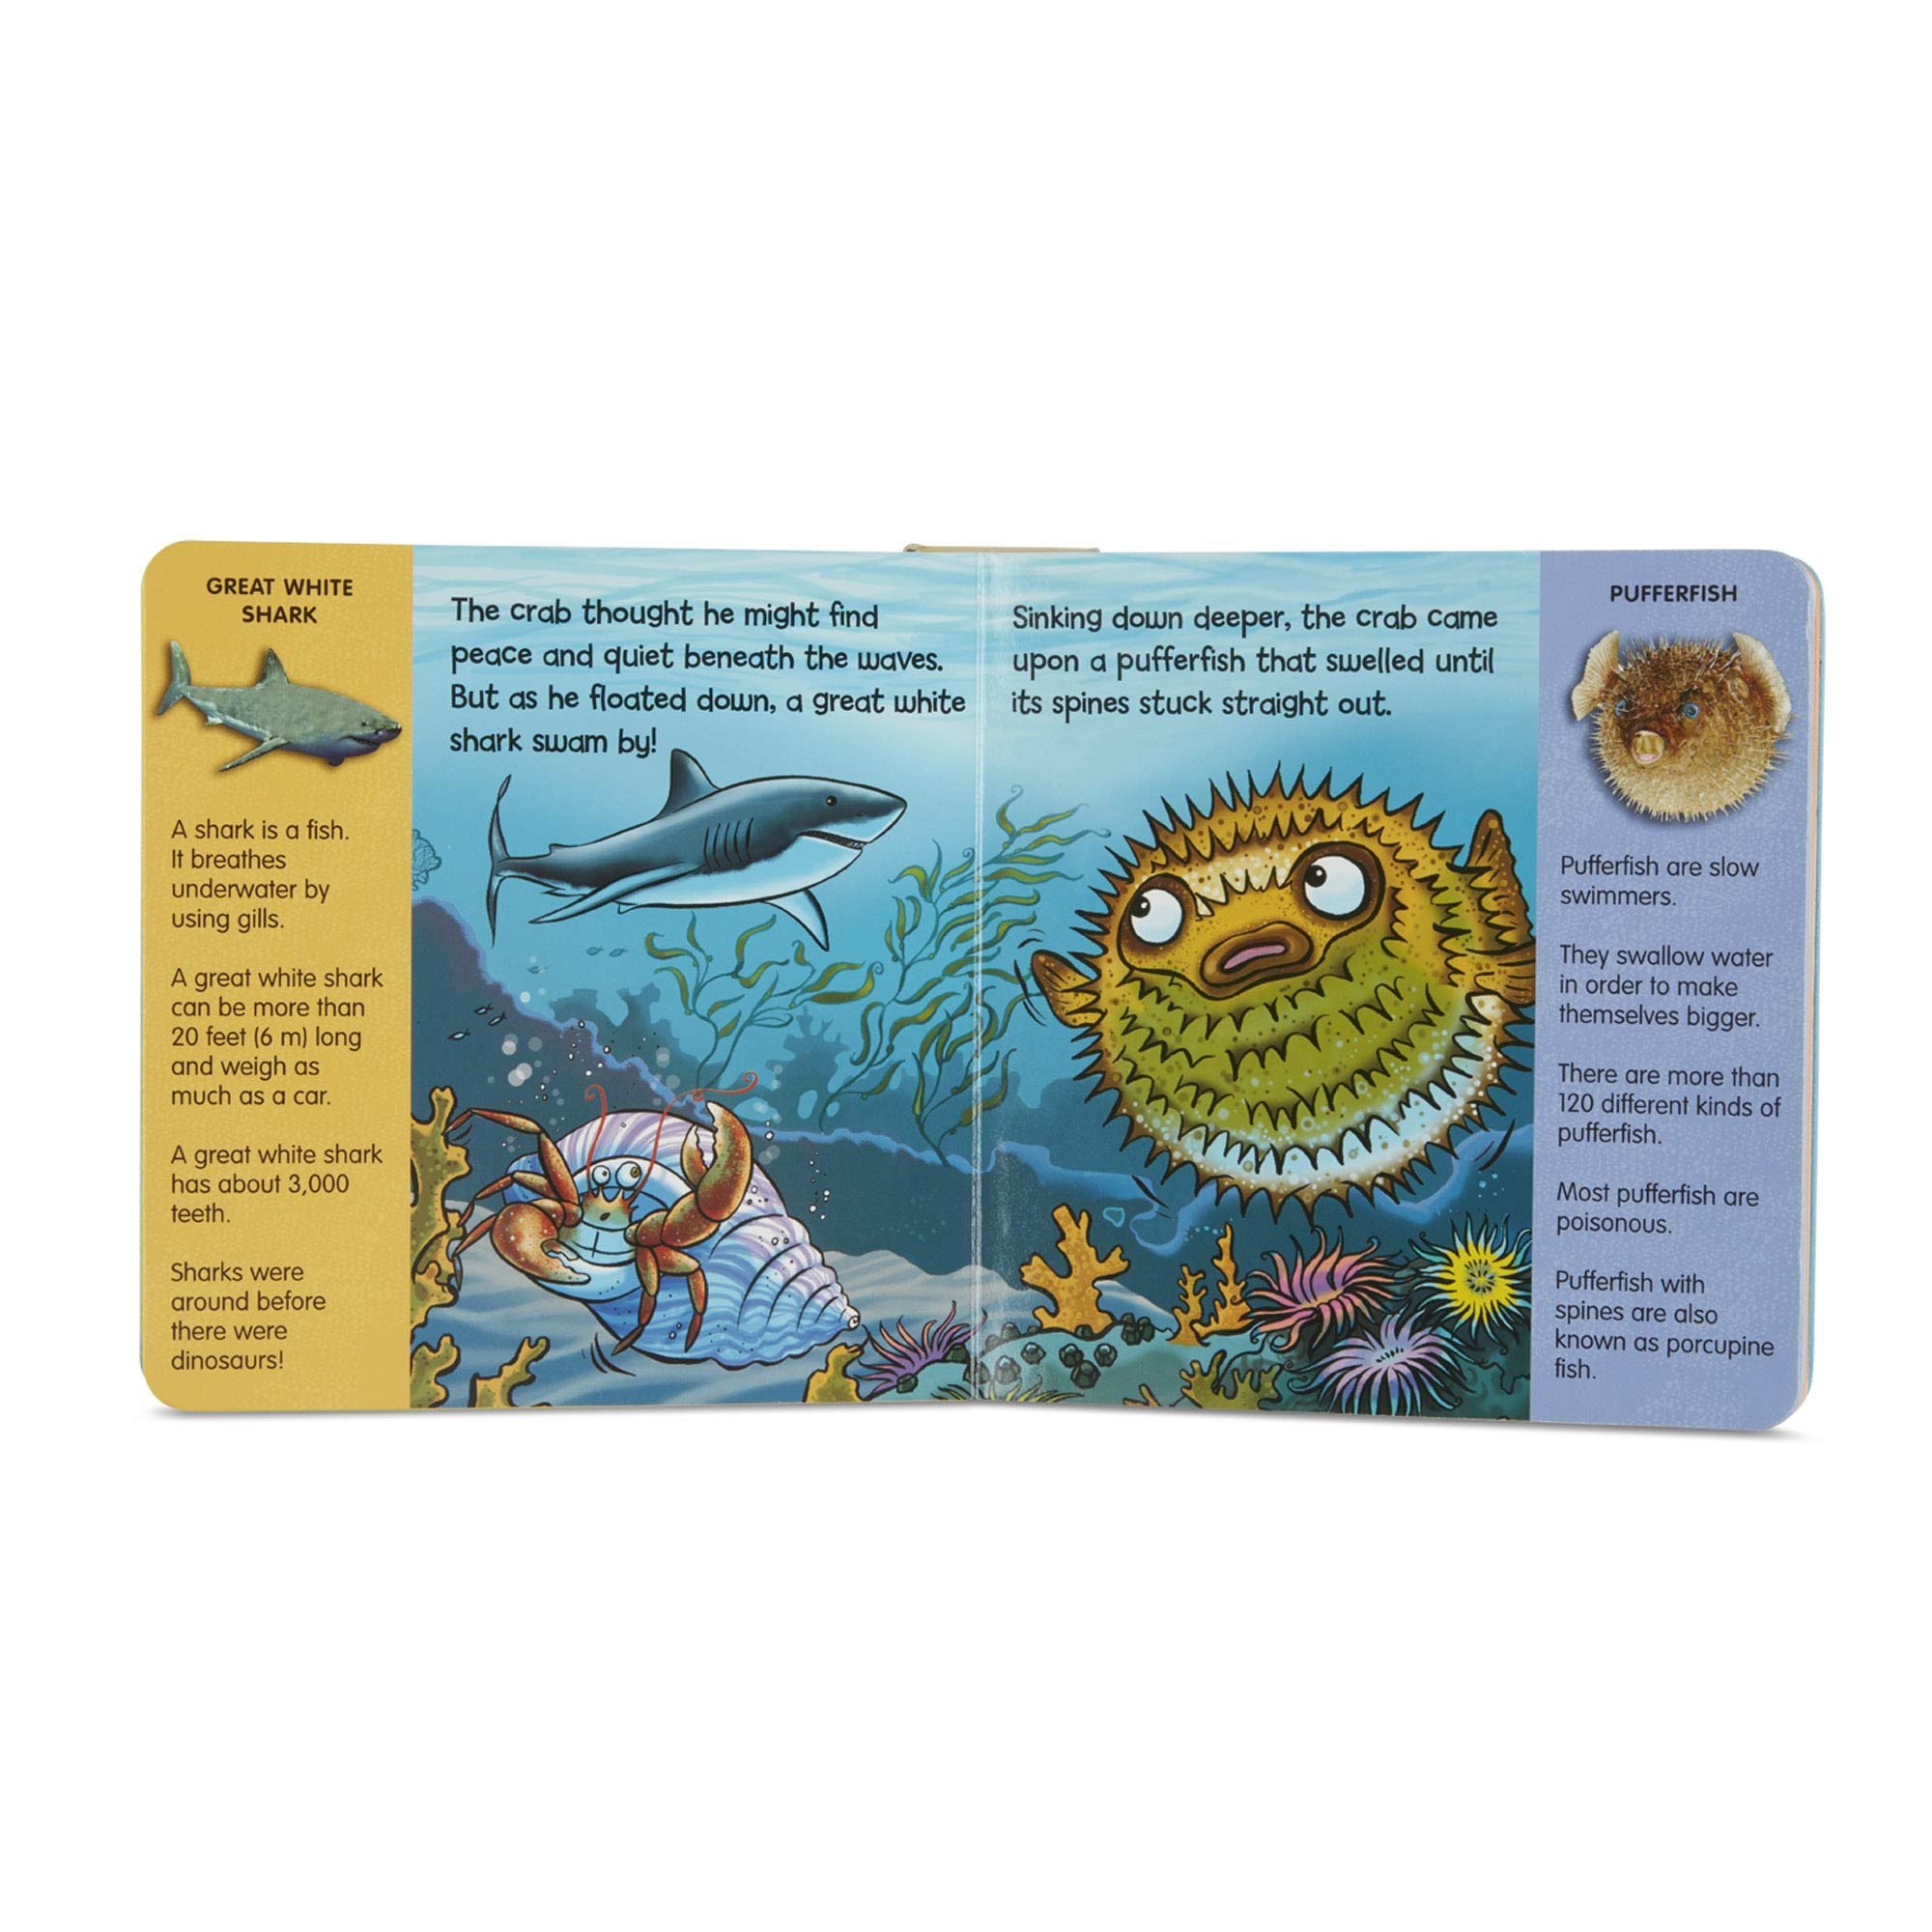 Melissa & Doug Children’s Book - Play-Alongs: At the Seashore (10 Pages, 10 Sea Creature Toys)